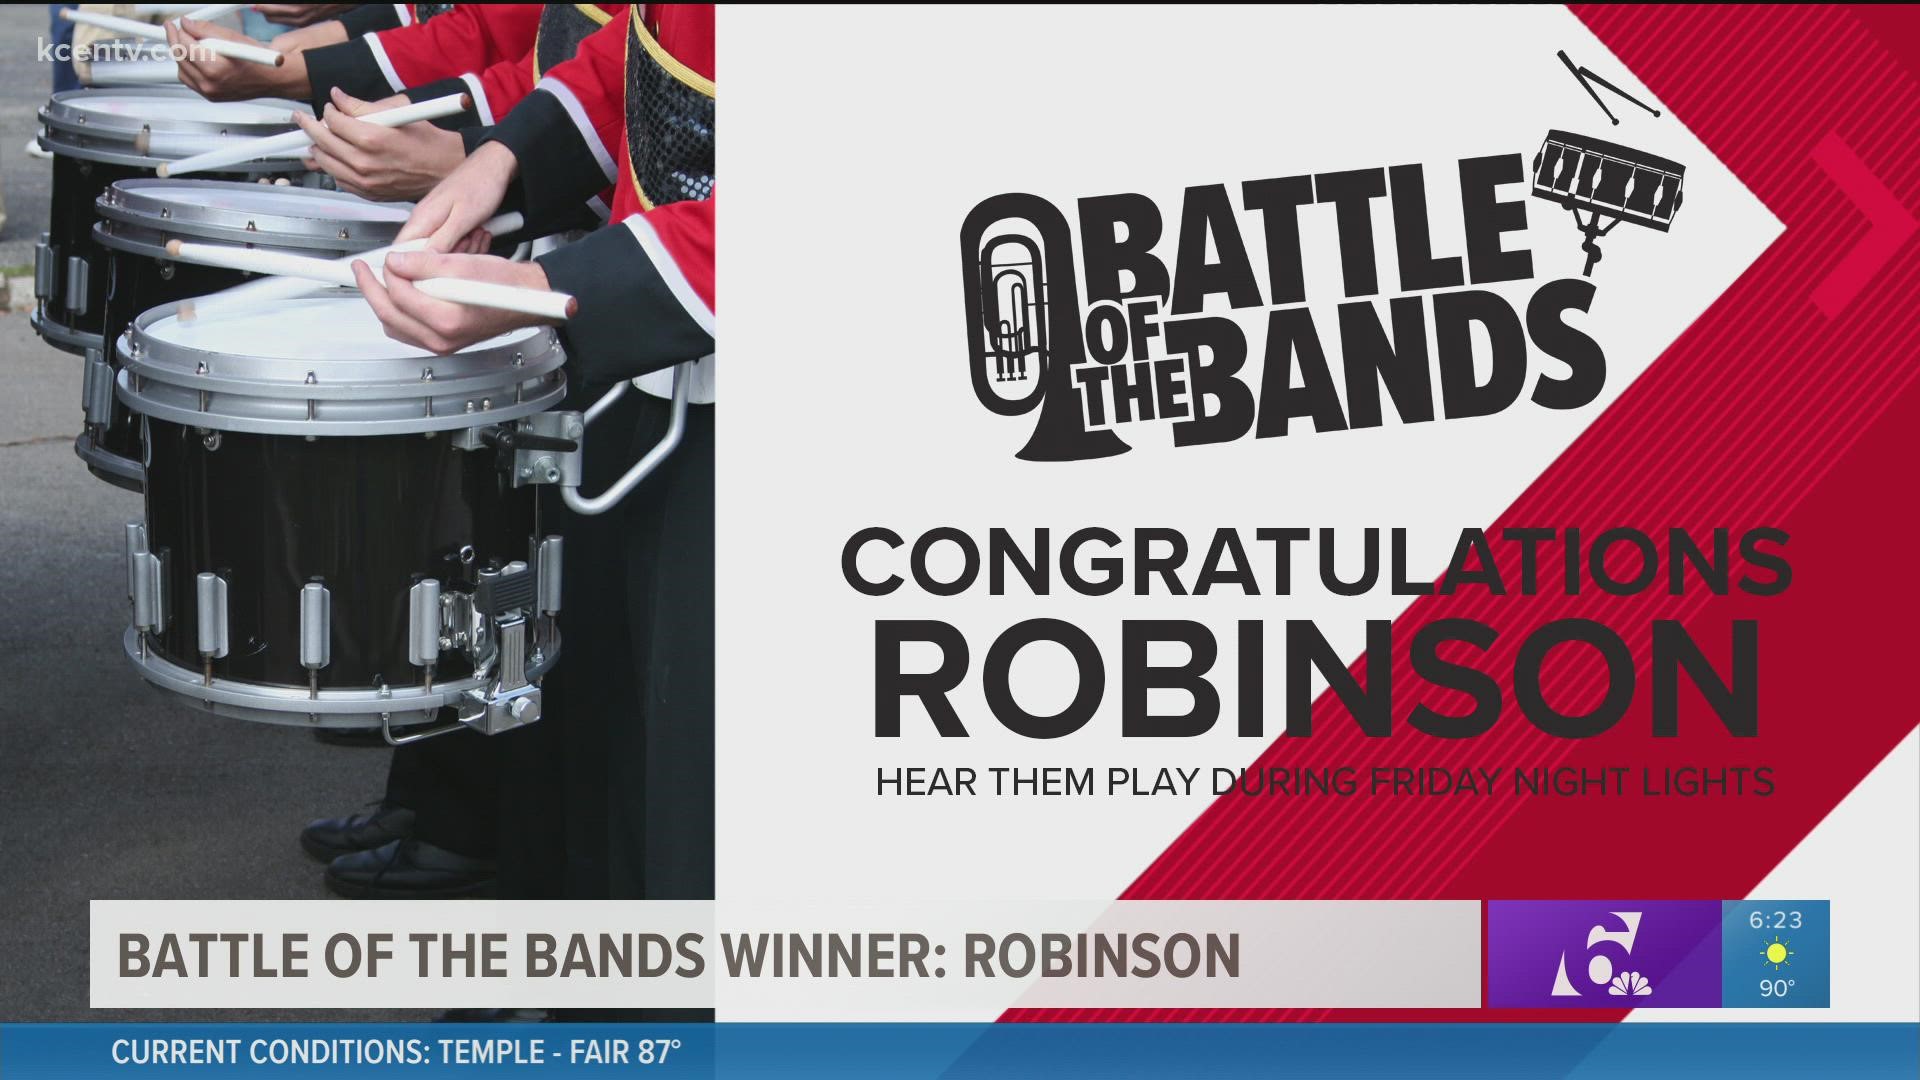 The Robinson Rocket marching band will be featured on Friday Night Lights starting at 10:10 p.m.